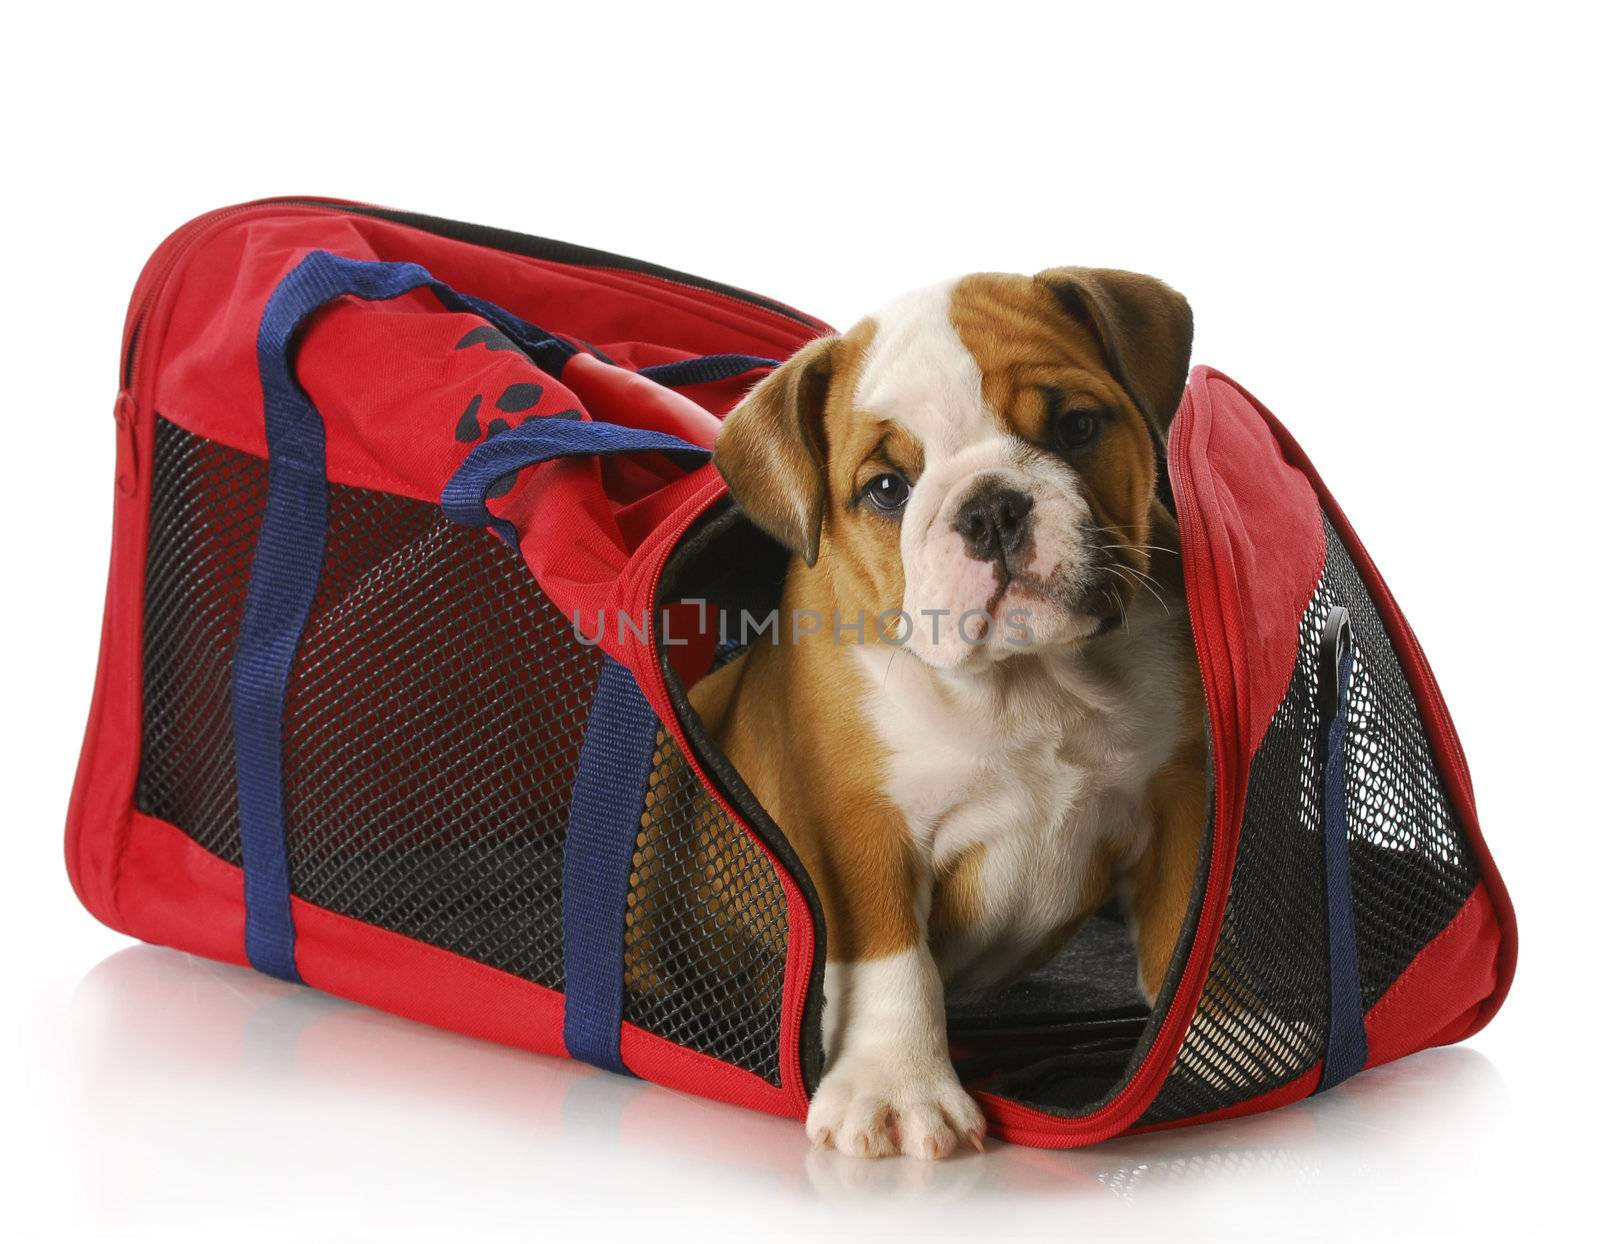 puppy in a travel bag by willeecole123